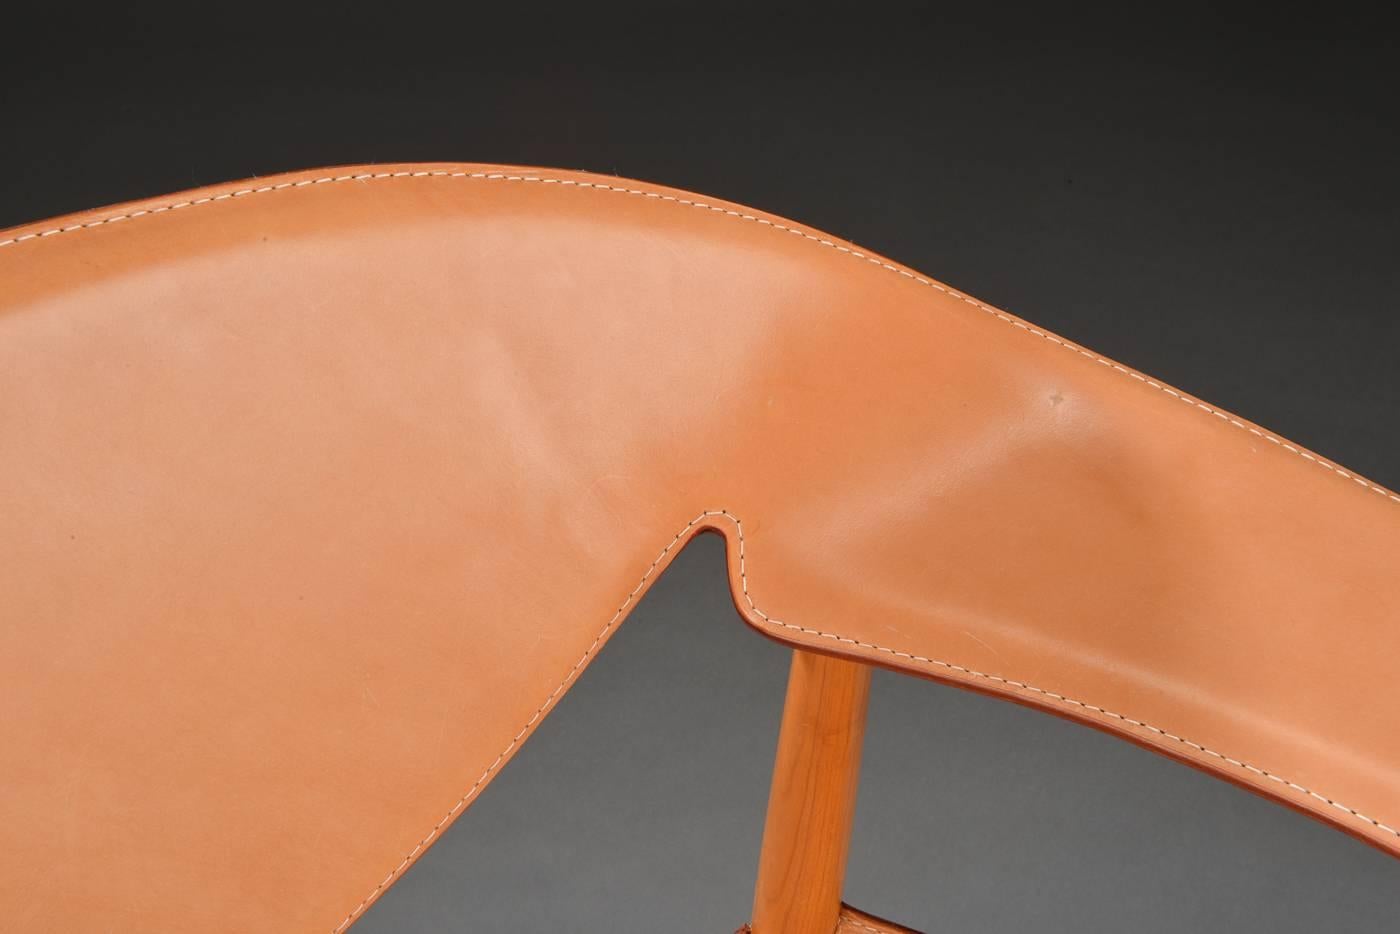 Lounge chair, model Metropolitan Chair. Cherry frame upholstered in harness leather. Designed in 1959. Presented at the Copenhagen Cabinetmaker Guild Exhibition at Kunstindustrimuseet in 1959. Produced by Søren Horns eftf. Snedkermester Niels Roth